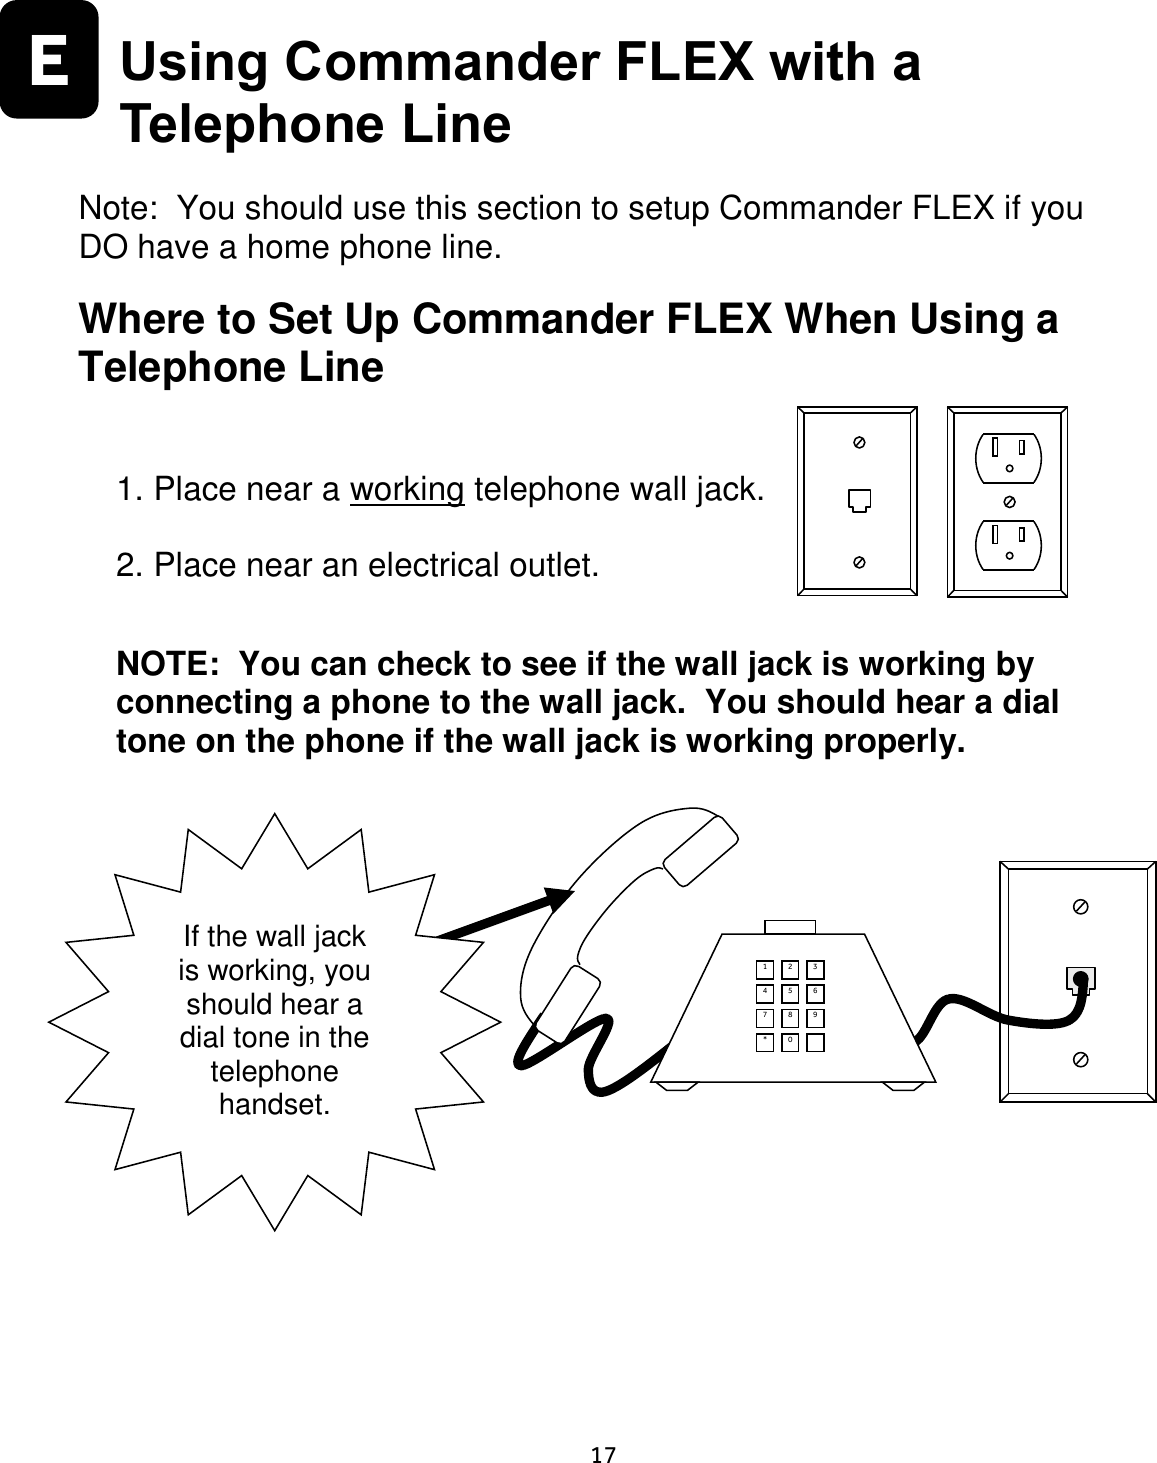     17  E  Using Commander FLEX with a Telephone Line  Note:  You should use this section to setup Commander FLEX if you DO have a home phone line.  Where to Set Up Commander FLEX When Using a Telephone Line  1. Place near a working telephone wall jack.  2. Place near an electrical outlet.   NOTE:  You can check to see if the wall jack is working by connecting a phone to the wall jack.  You should hear a dial tone on the phone if the wall jack is working properly.             If the wall jack is working, you should hear a dial tone in the telephone handset. 1 2 3 4 5 6 7 8 9 * 0  